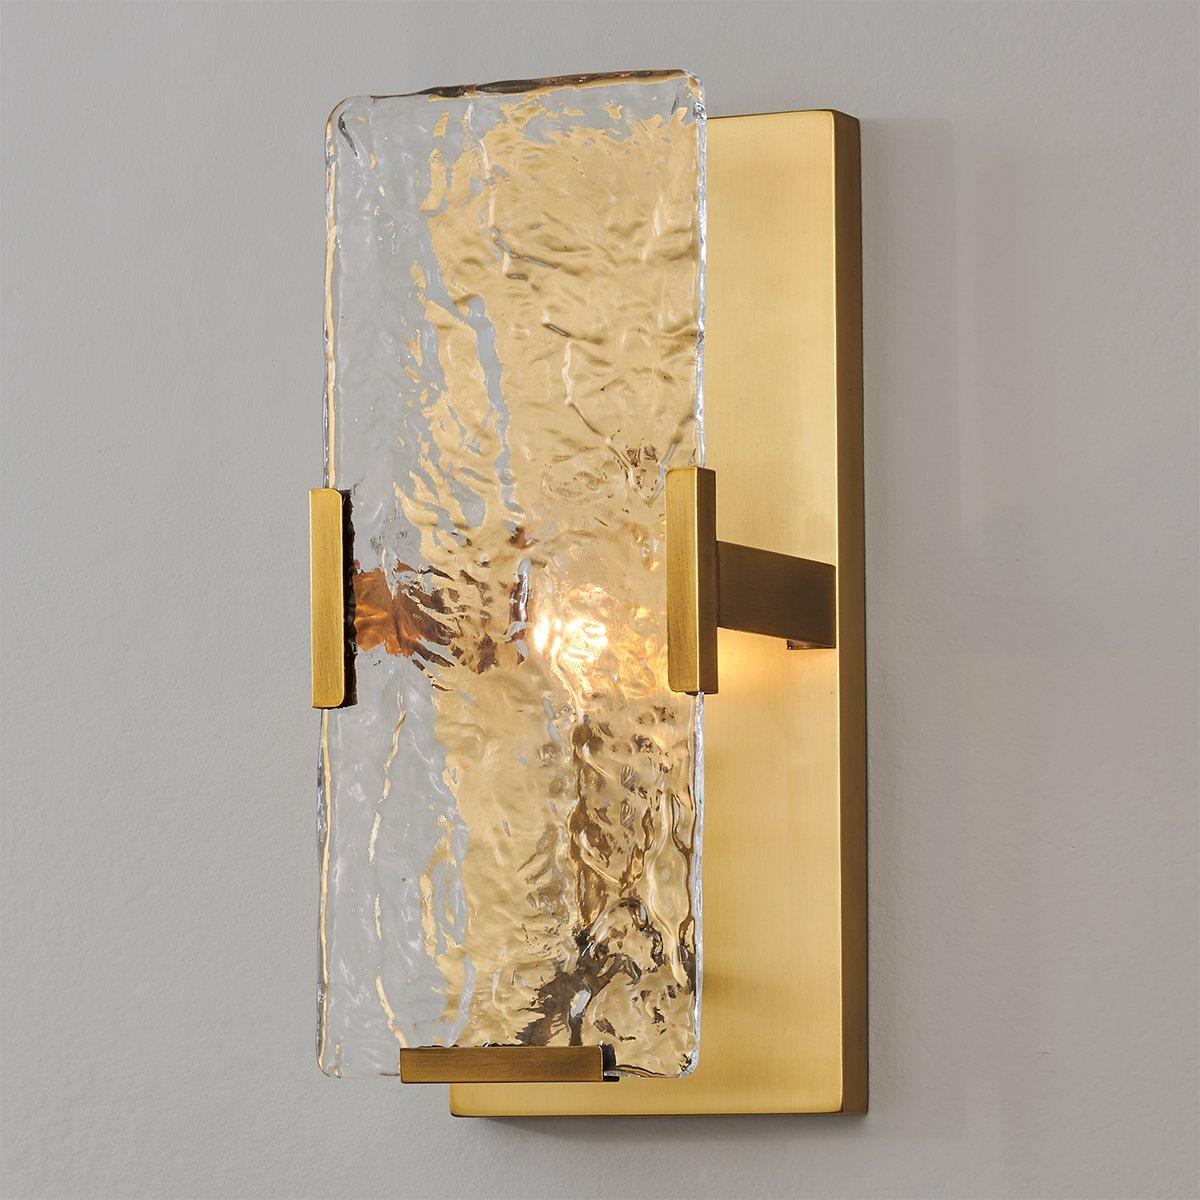 Textured Water Glass Pane Sconce